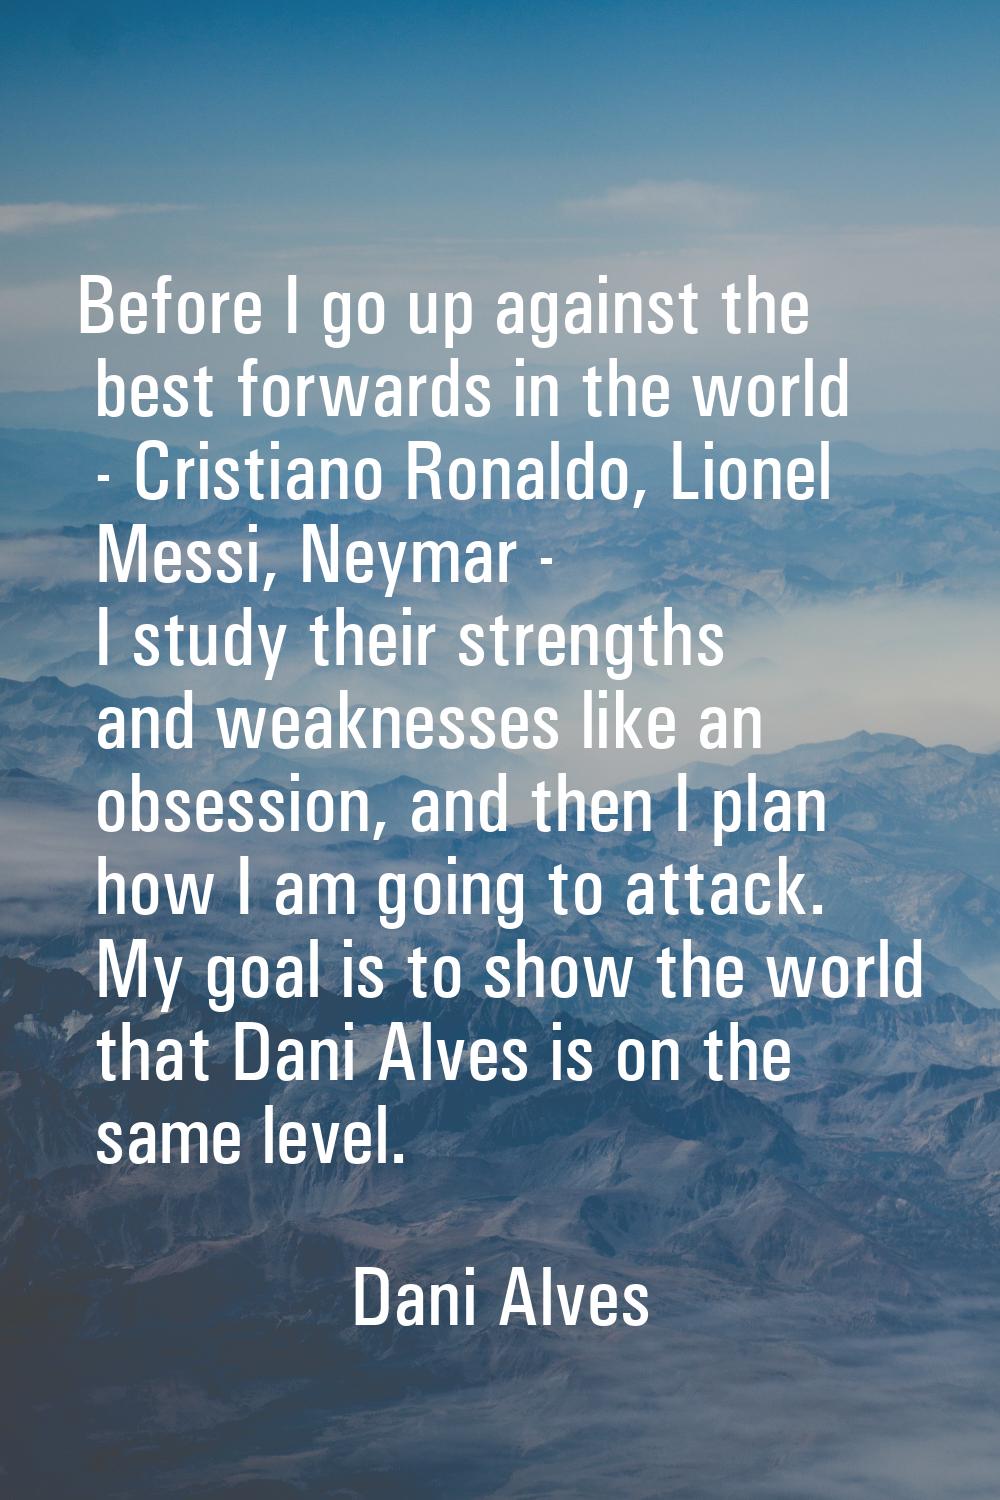 Before I go up against the best forwards in the world - Cristiano Ronaldo, Lionel Messi, Neymar - I